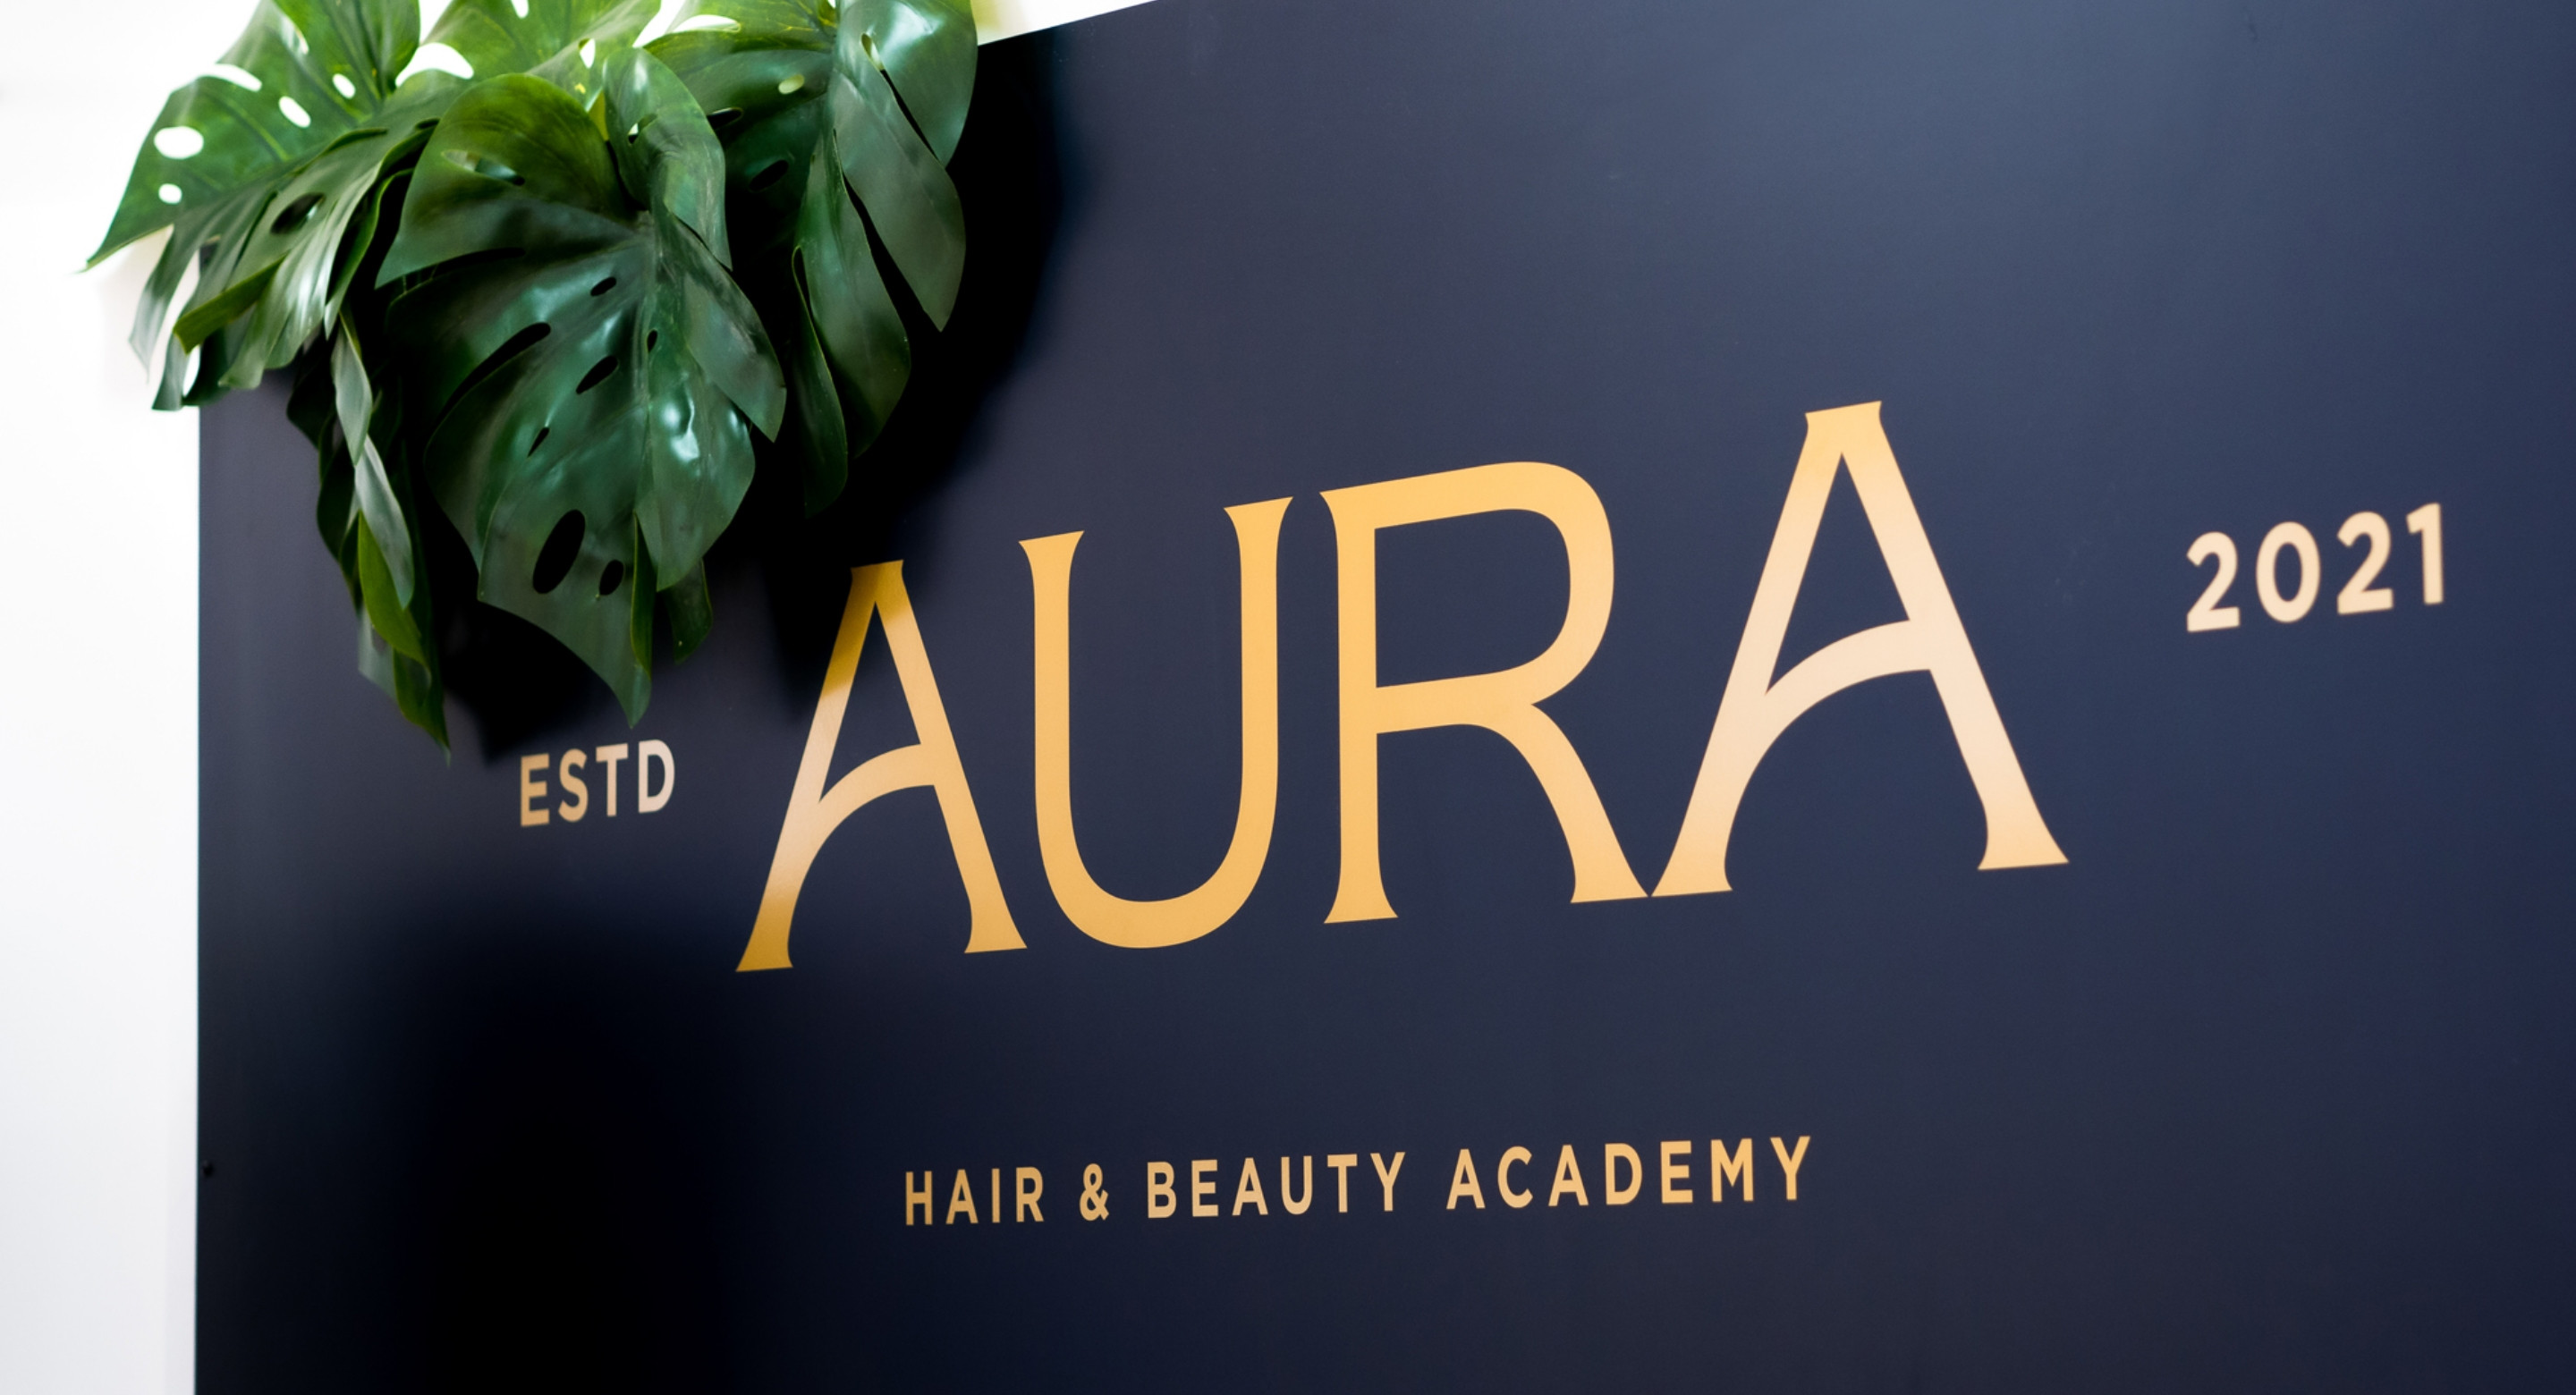 AURA Hair & Beauty logo signage design by Root Studio